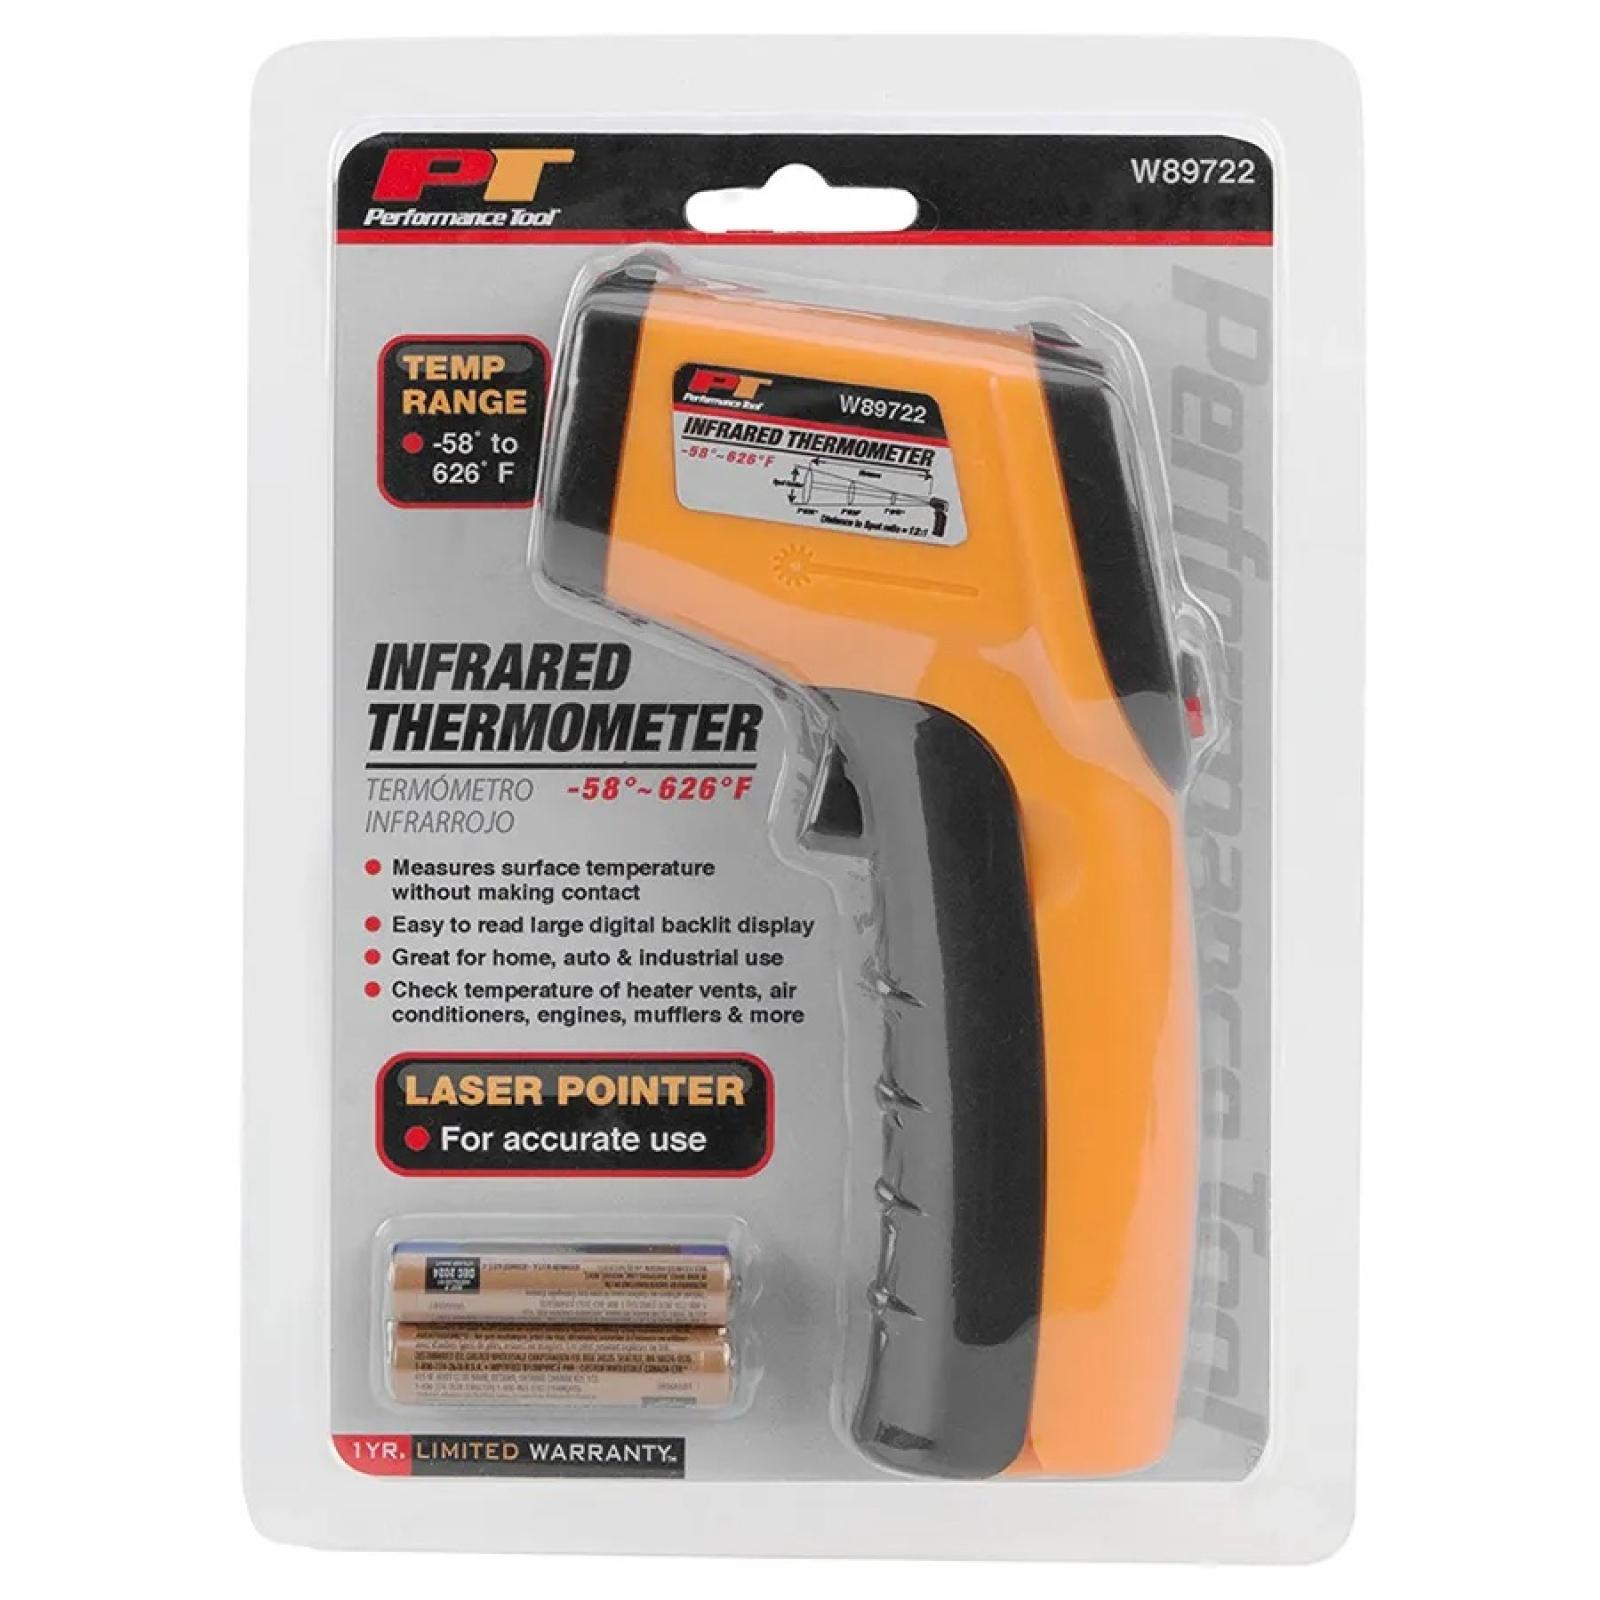 Performance Tool Infrared Thermometer